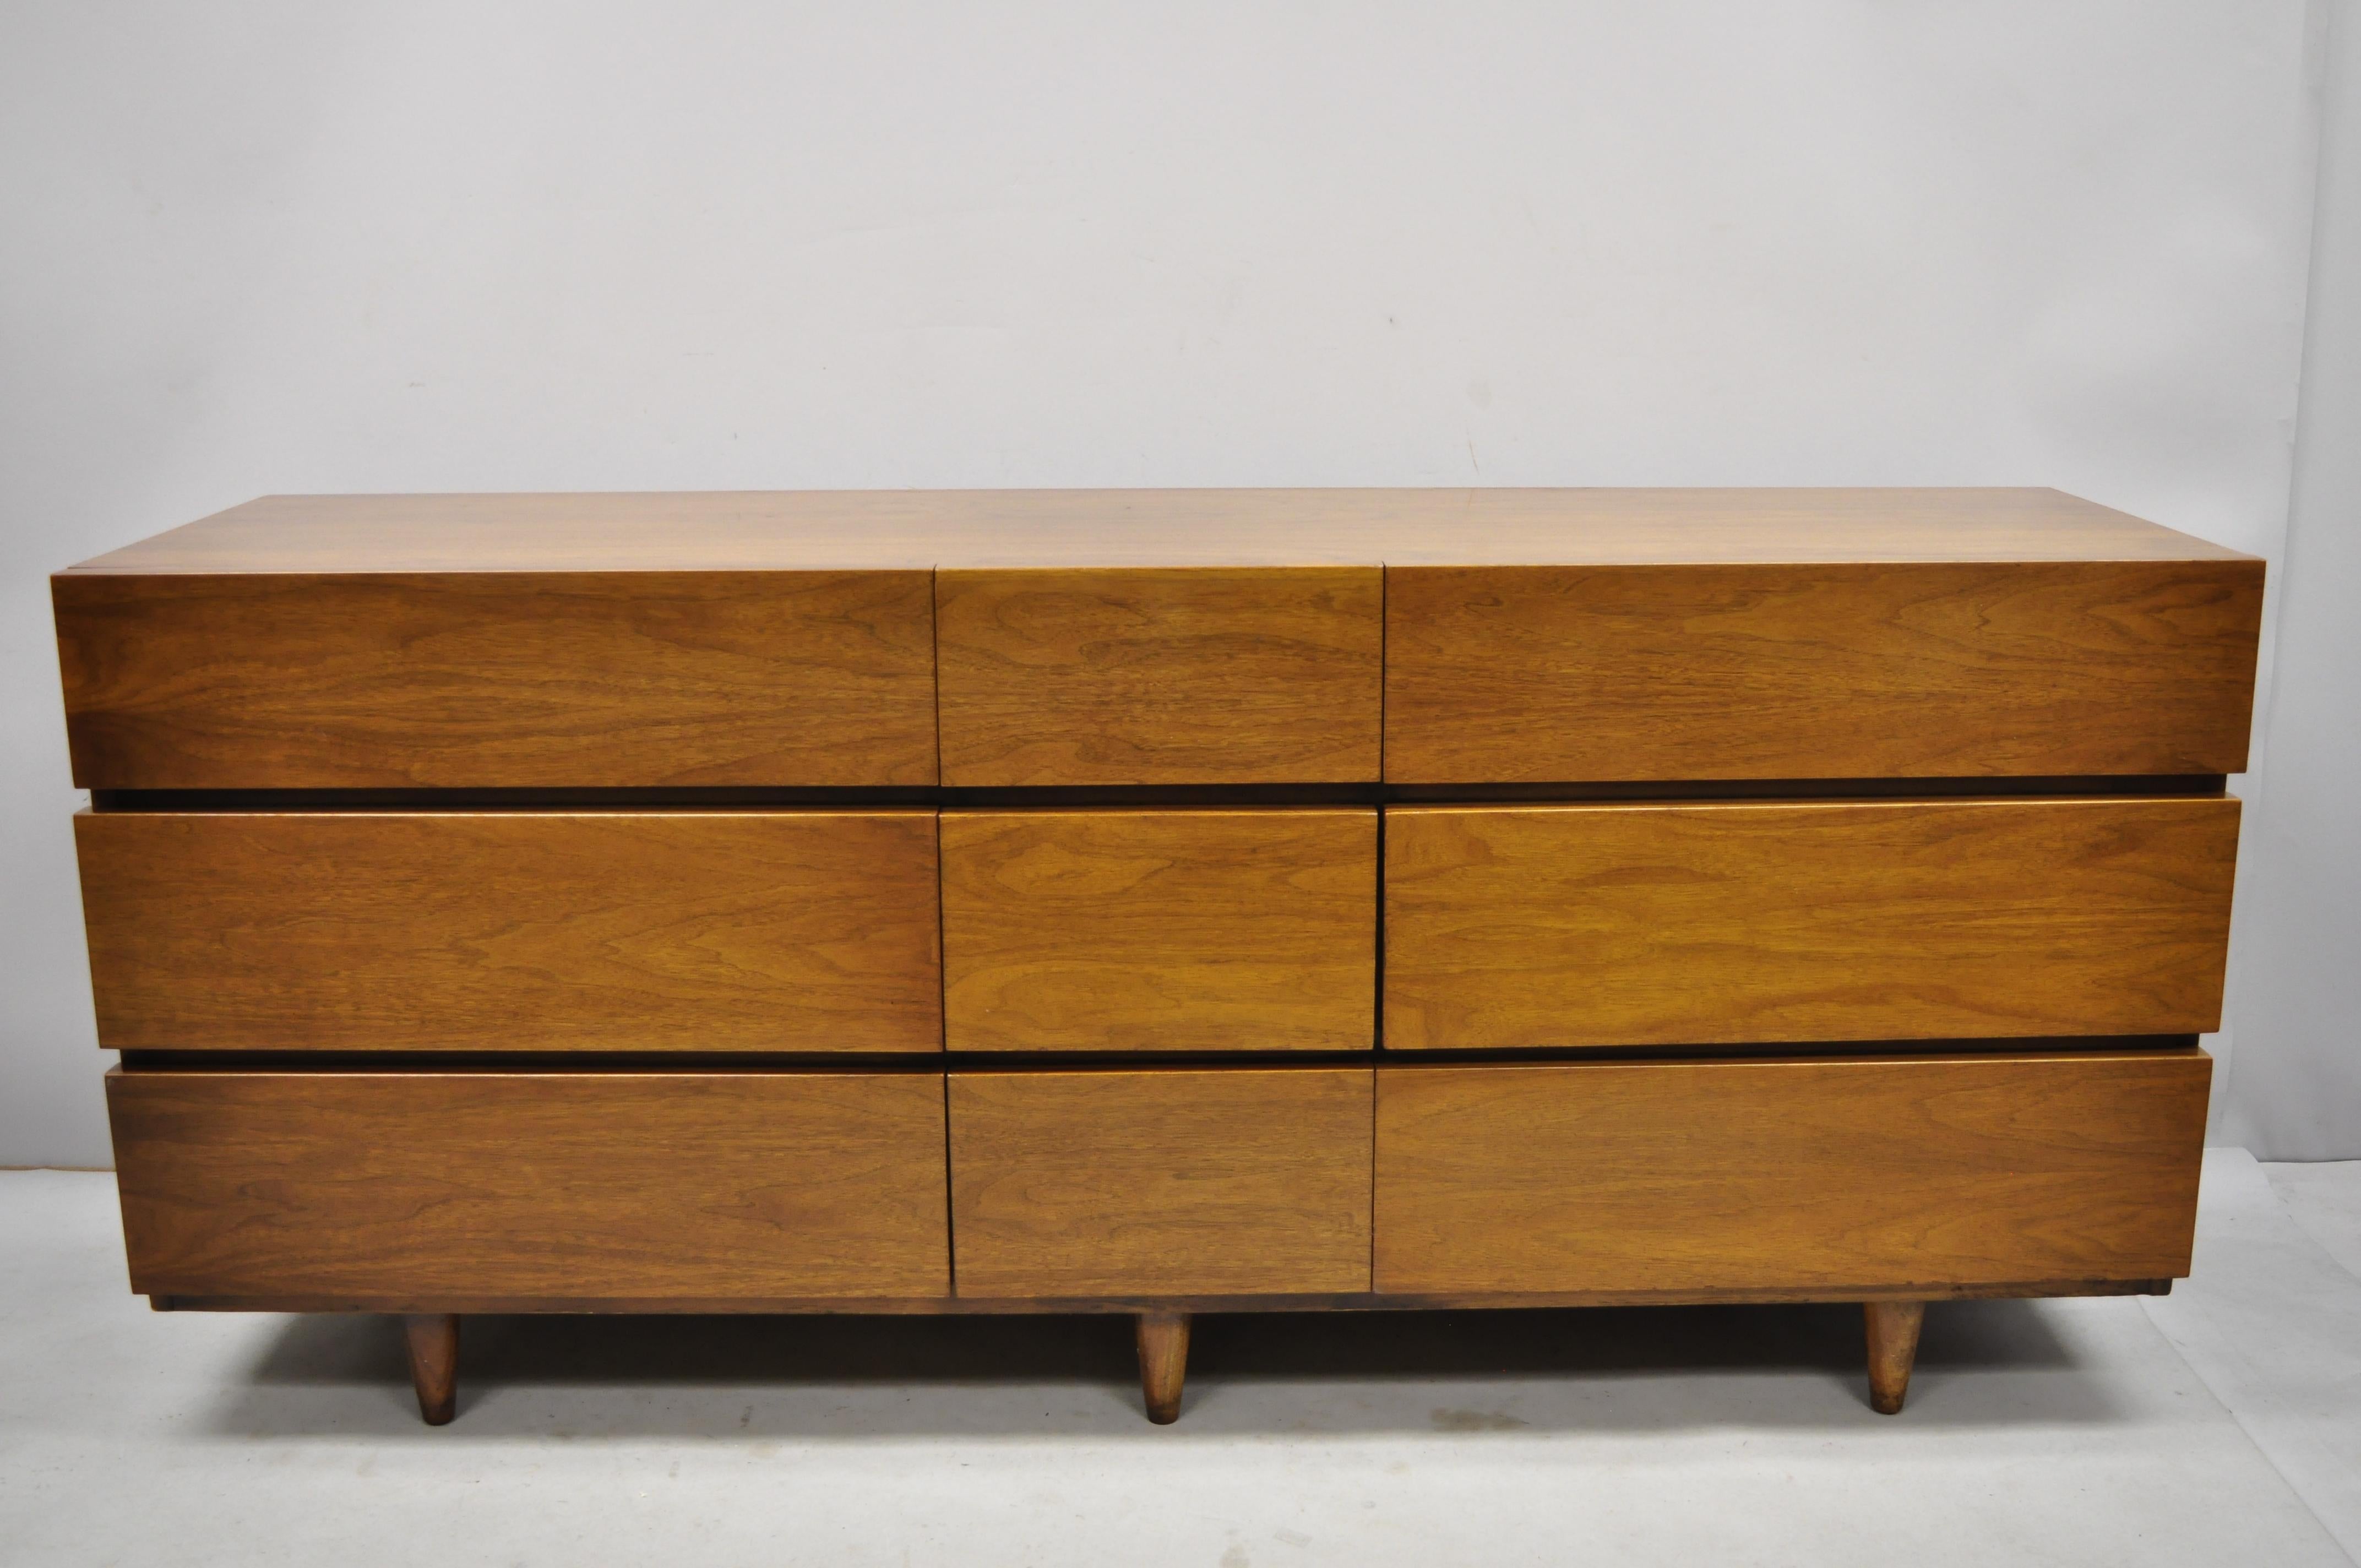 Vintage Mid-Century Modern American of Martinsville walnut long dresser credenza and mirror. Item includes beautiful wood grain, 9 drawers, tapered legs, very nice vintage item, clean modernist lines, circa mid-20th century.
Dresser: 31